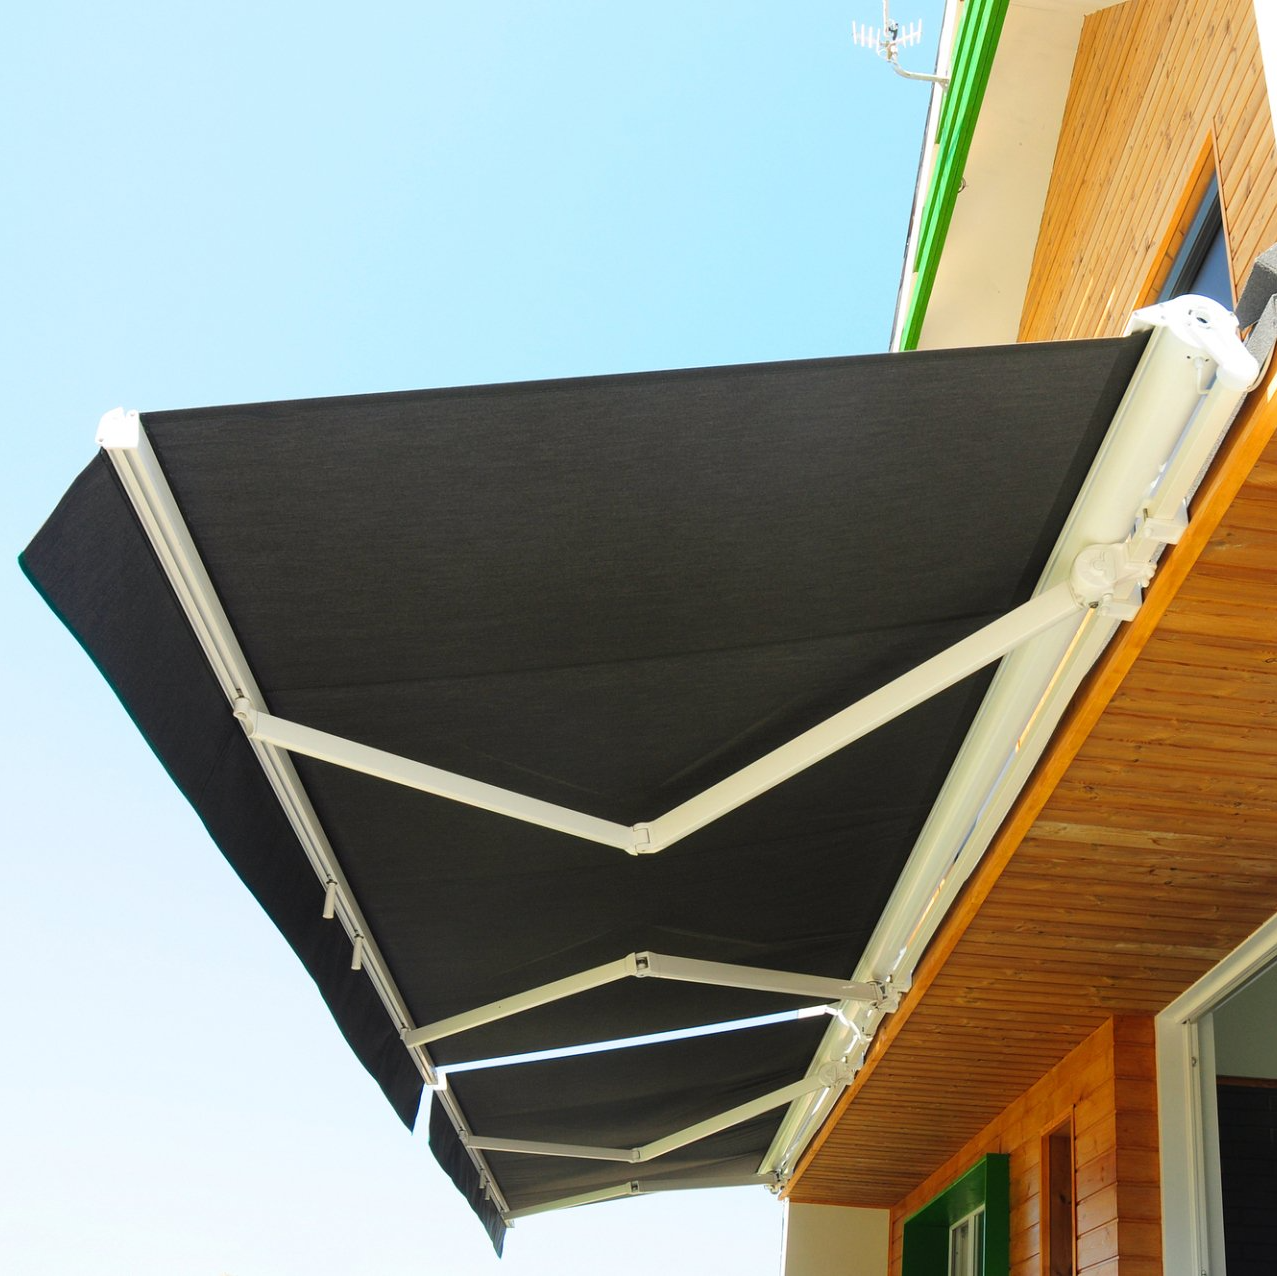 Black awning with white retractable arms, affixed to external wall of timber building.